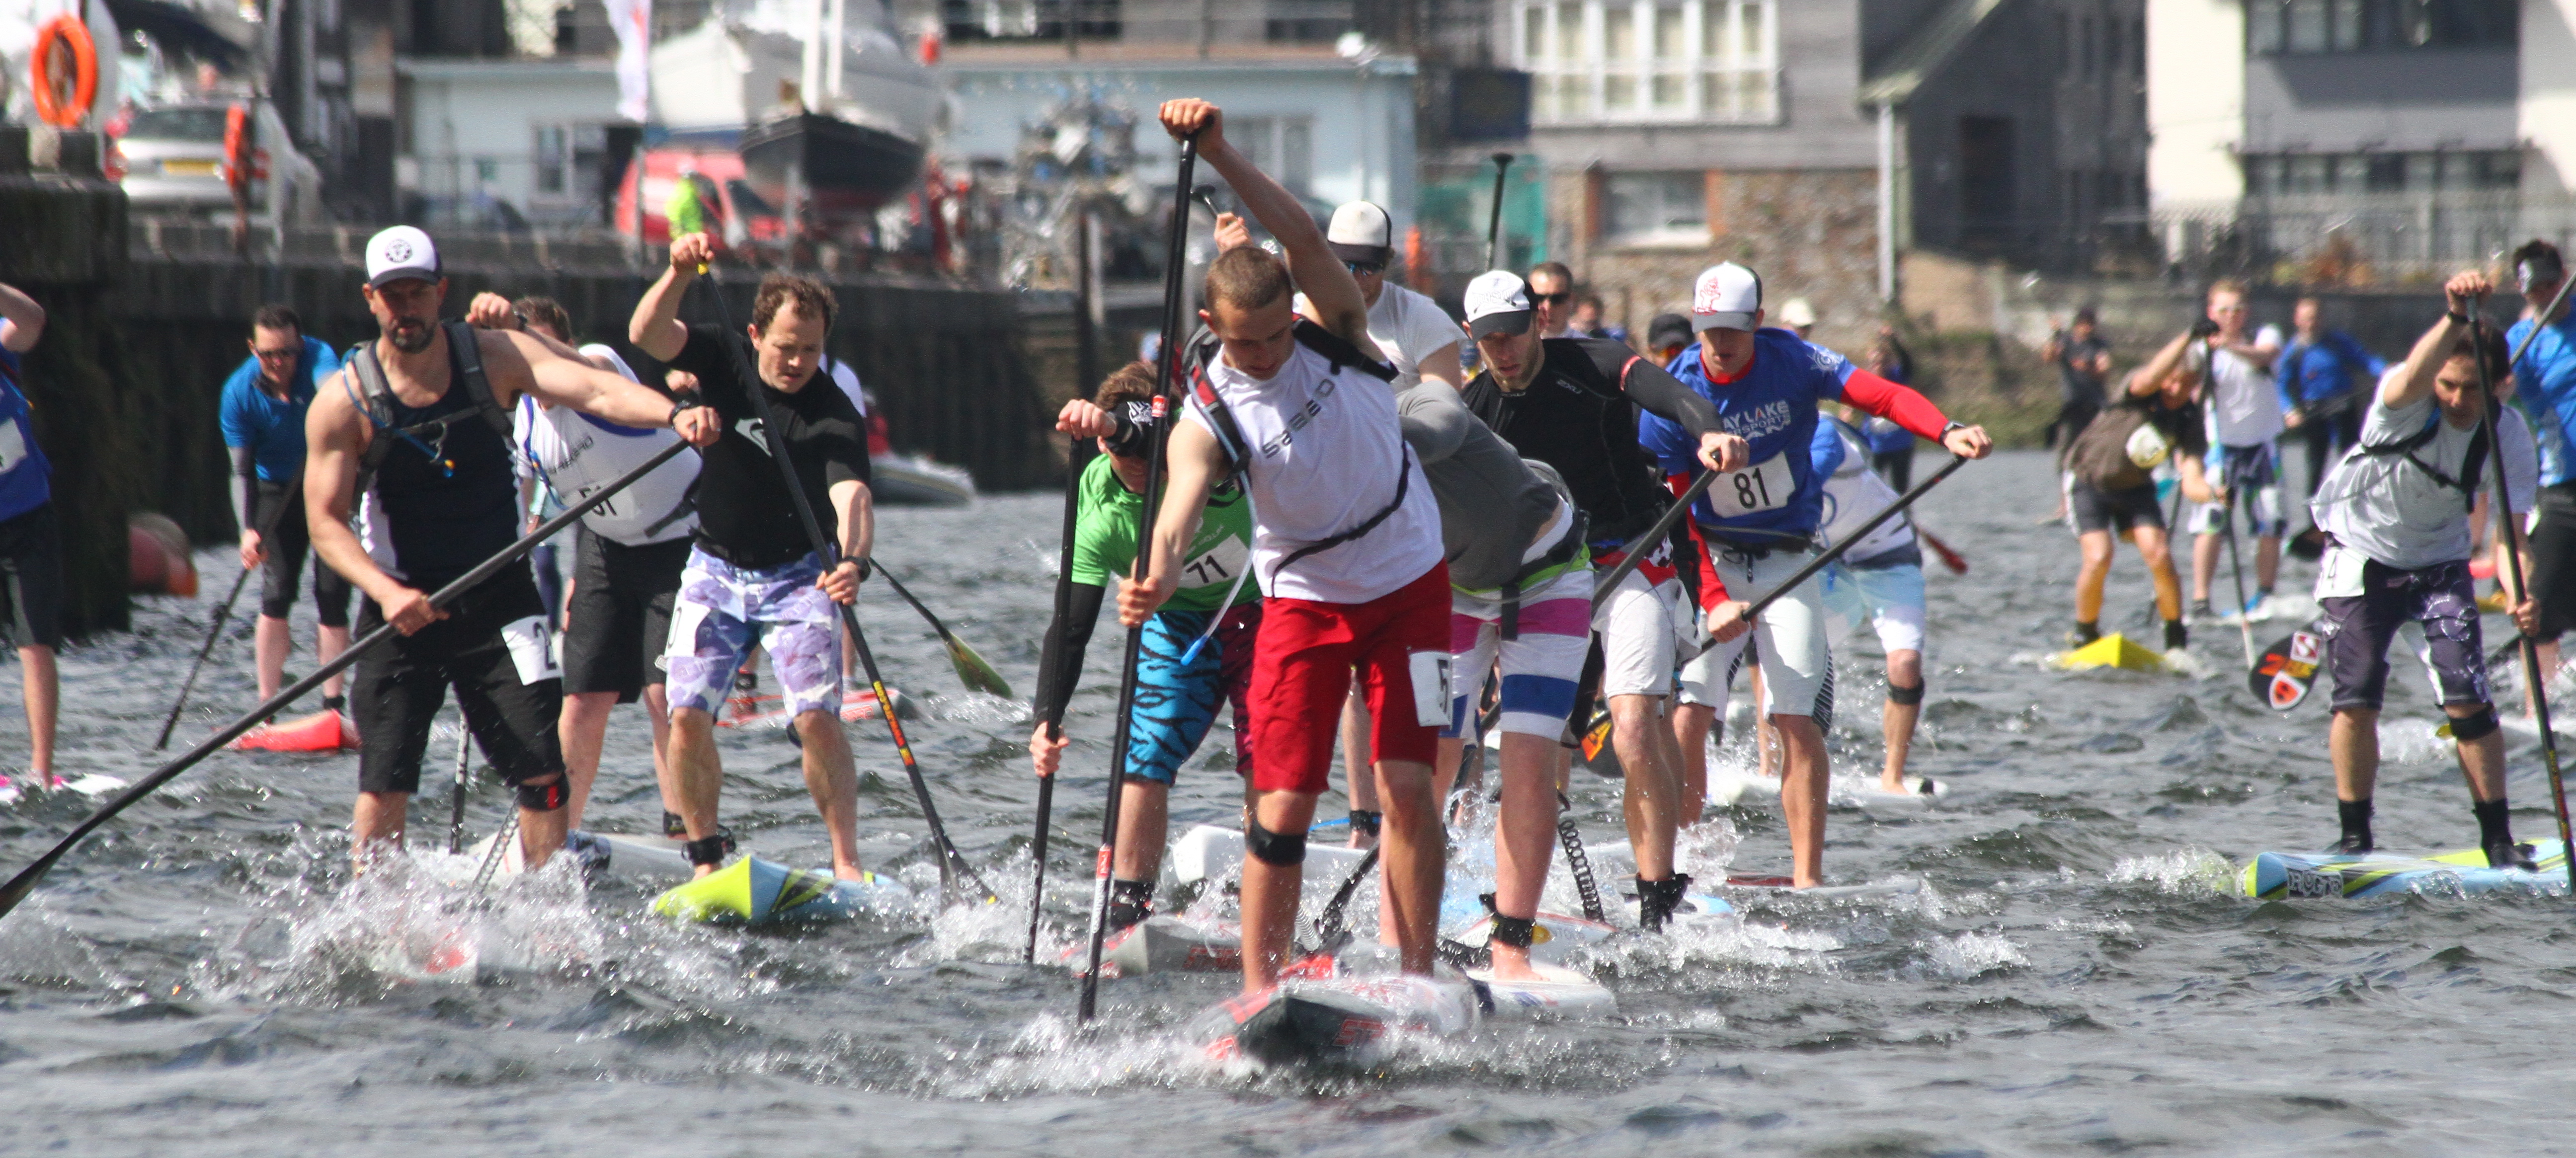 What motivates you to SUP race?